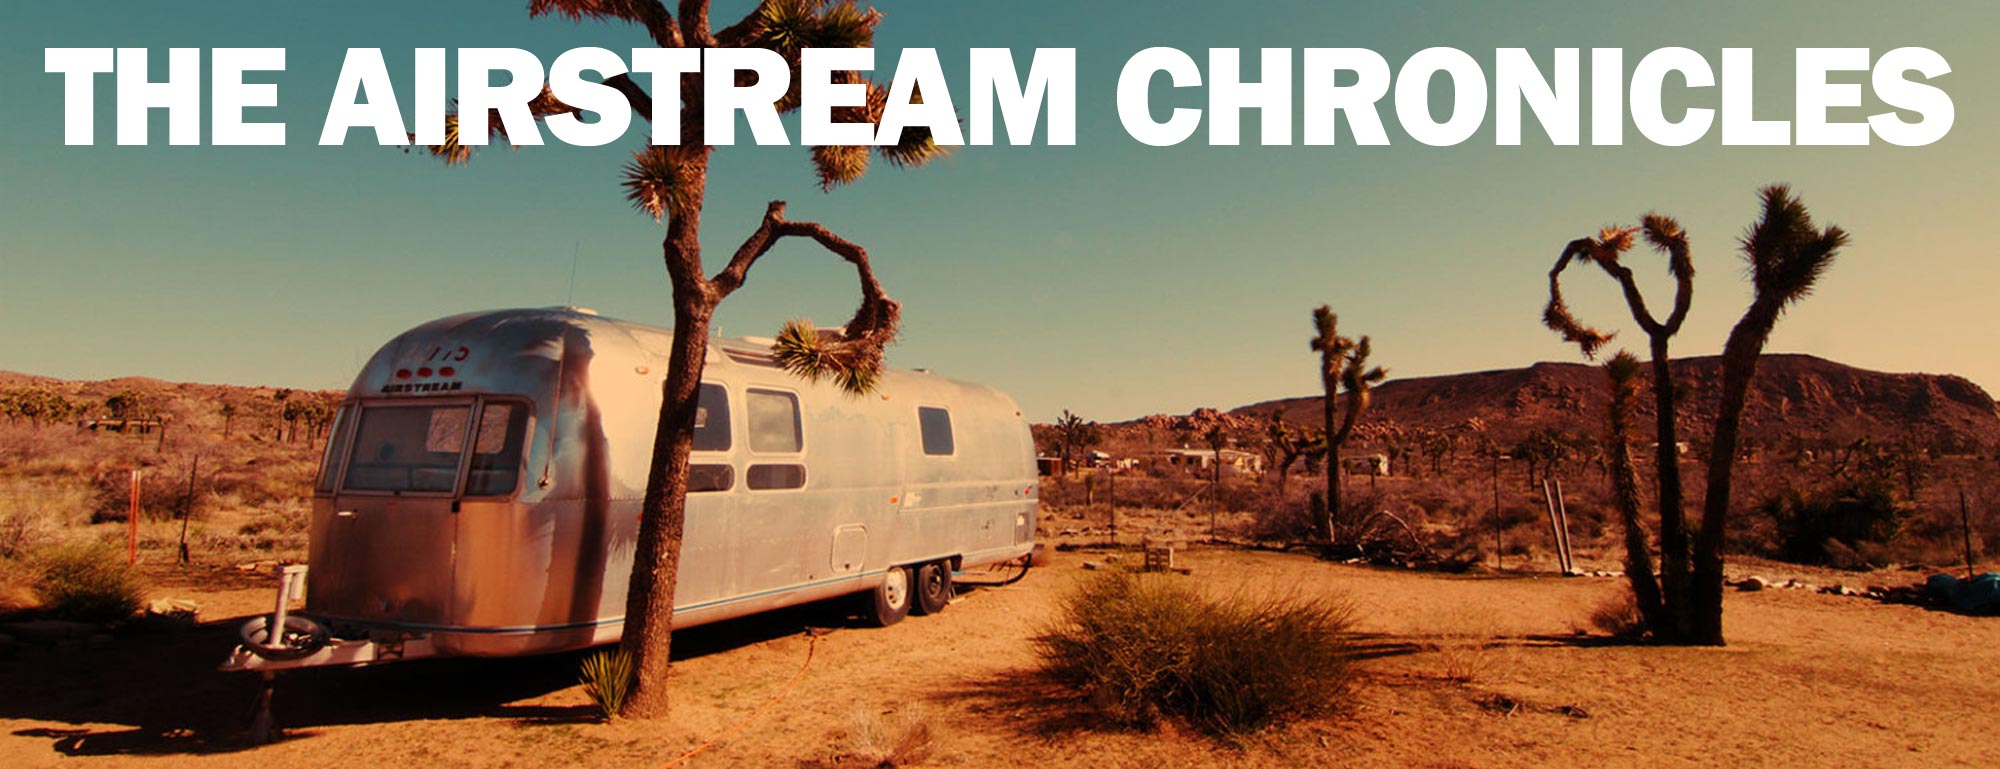 THE AIRSTREAM CHRONICLES